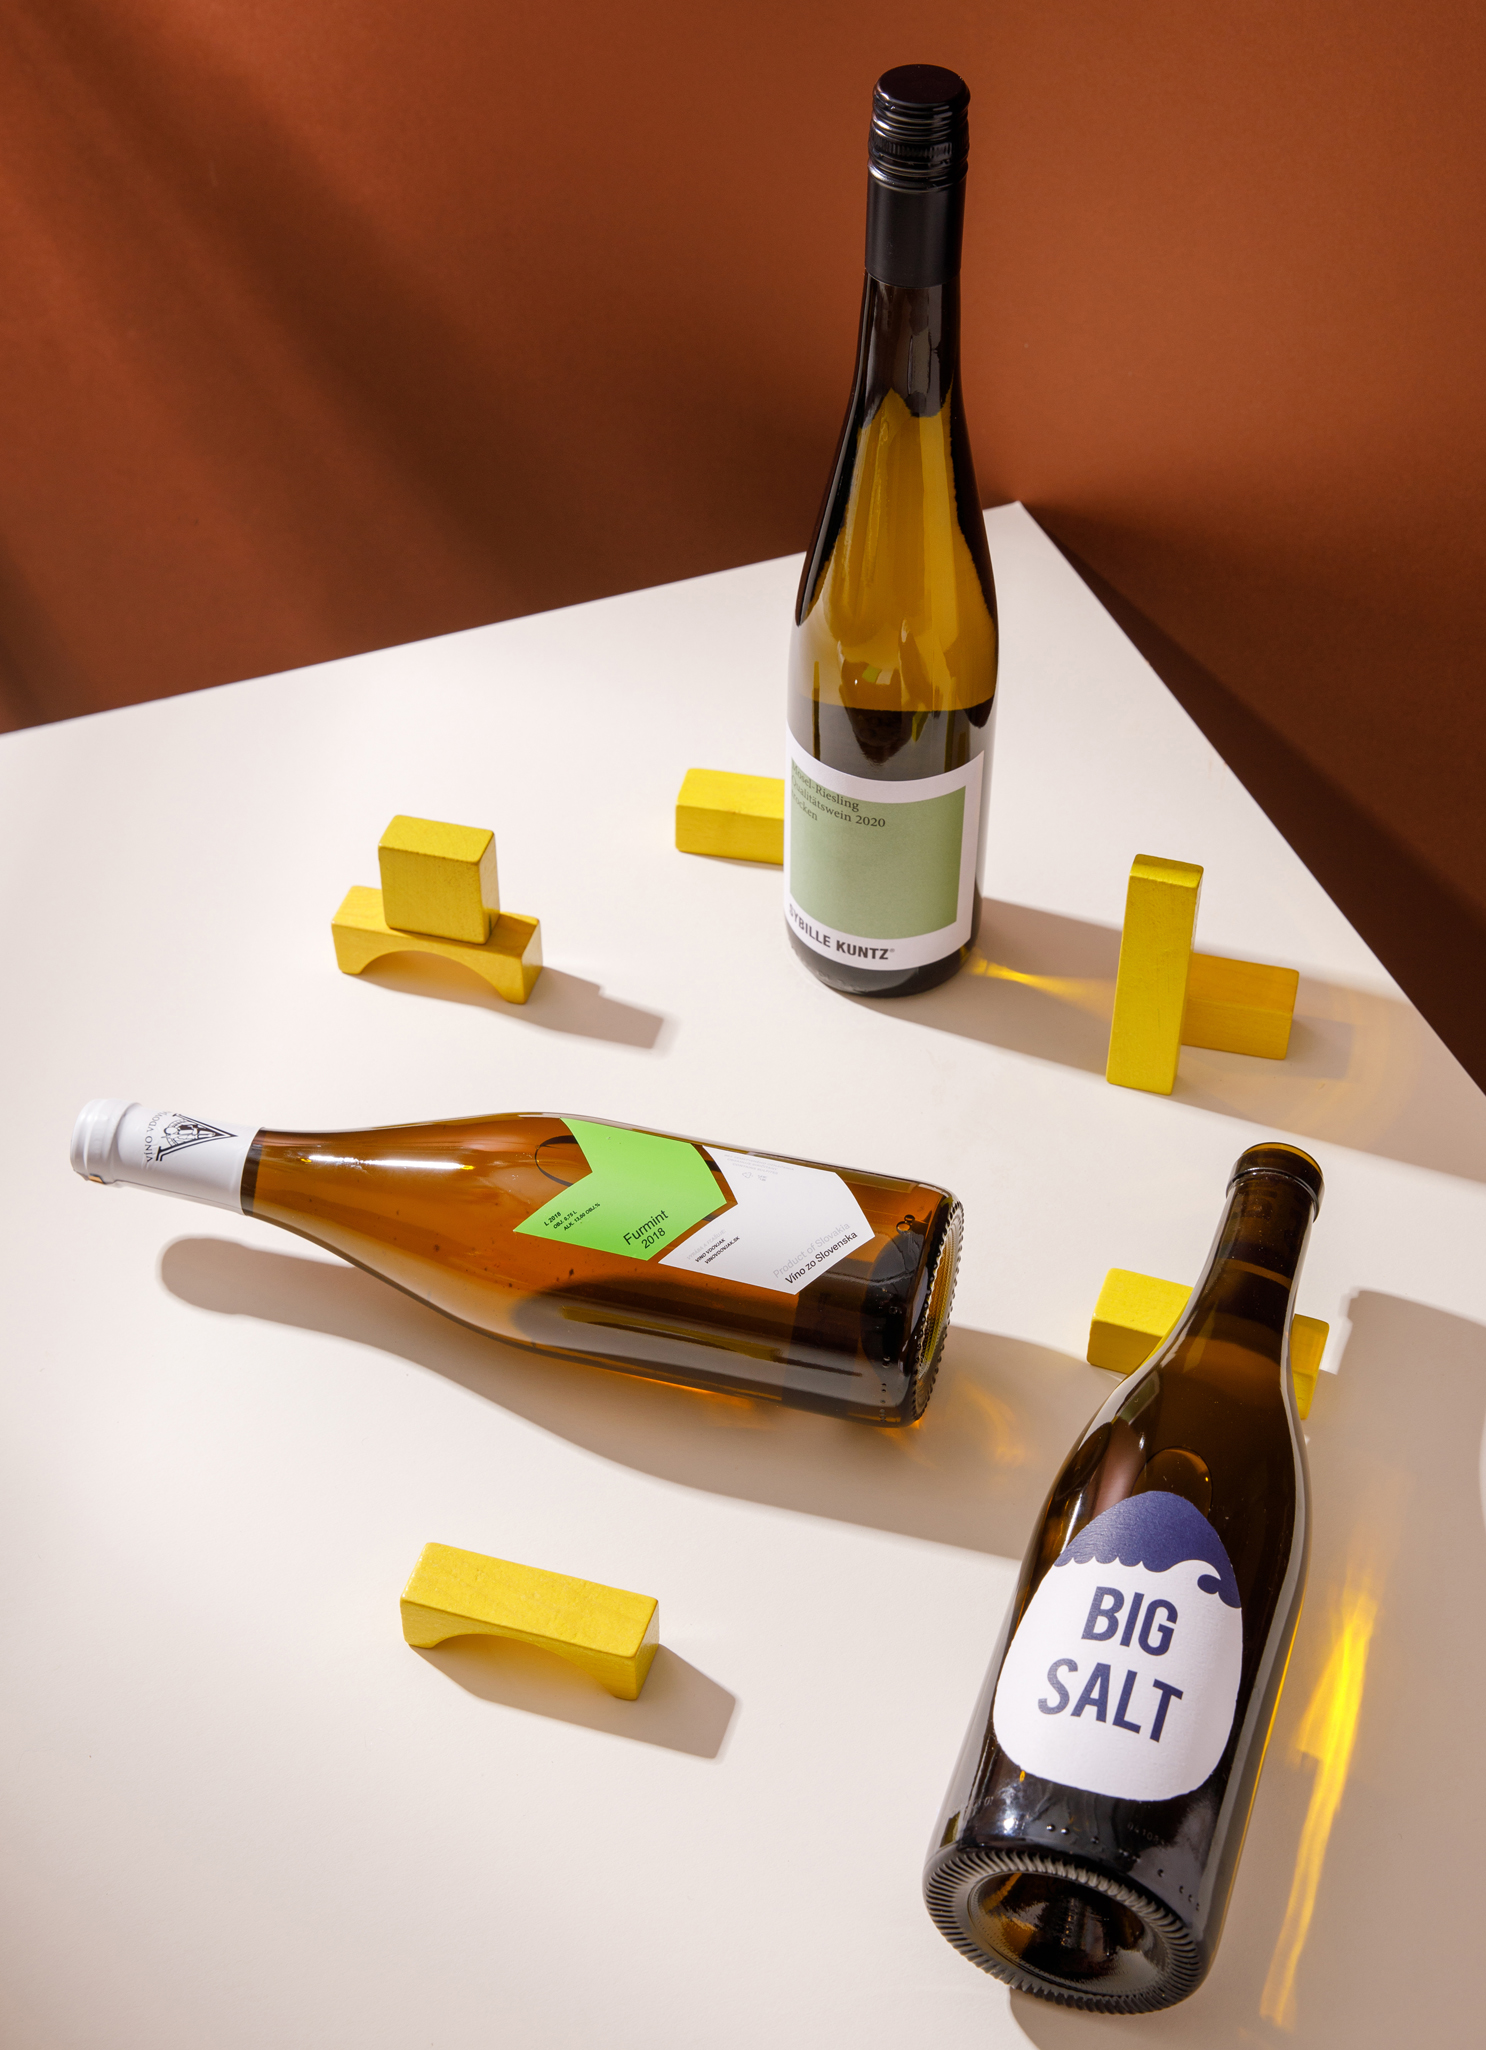 photograph of three bottles of white wine arranged geometrically with yellow wooden blocks filling the spaces on the table. Table is off white in colour, background is chestnut brown